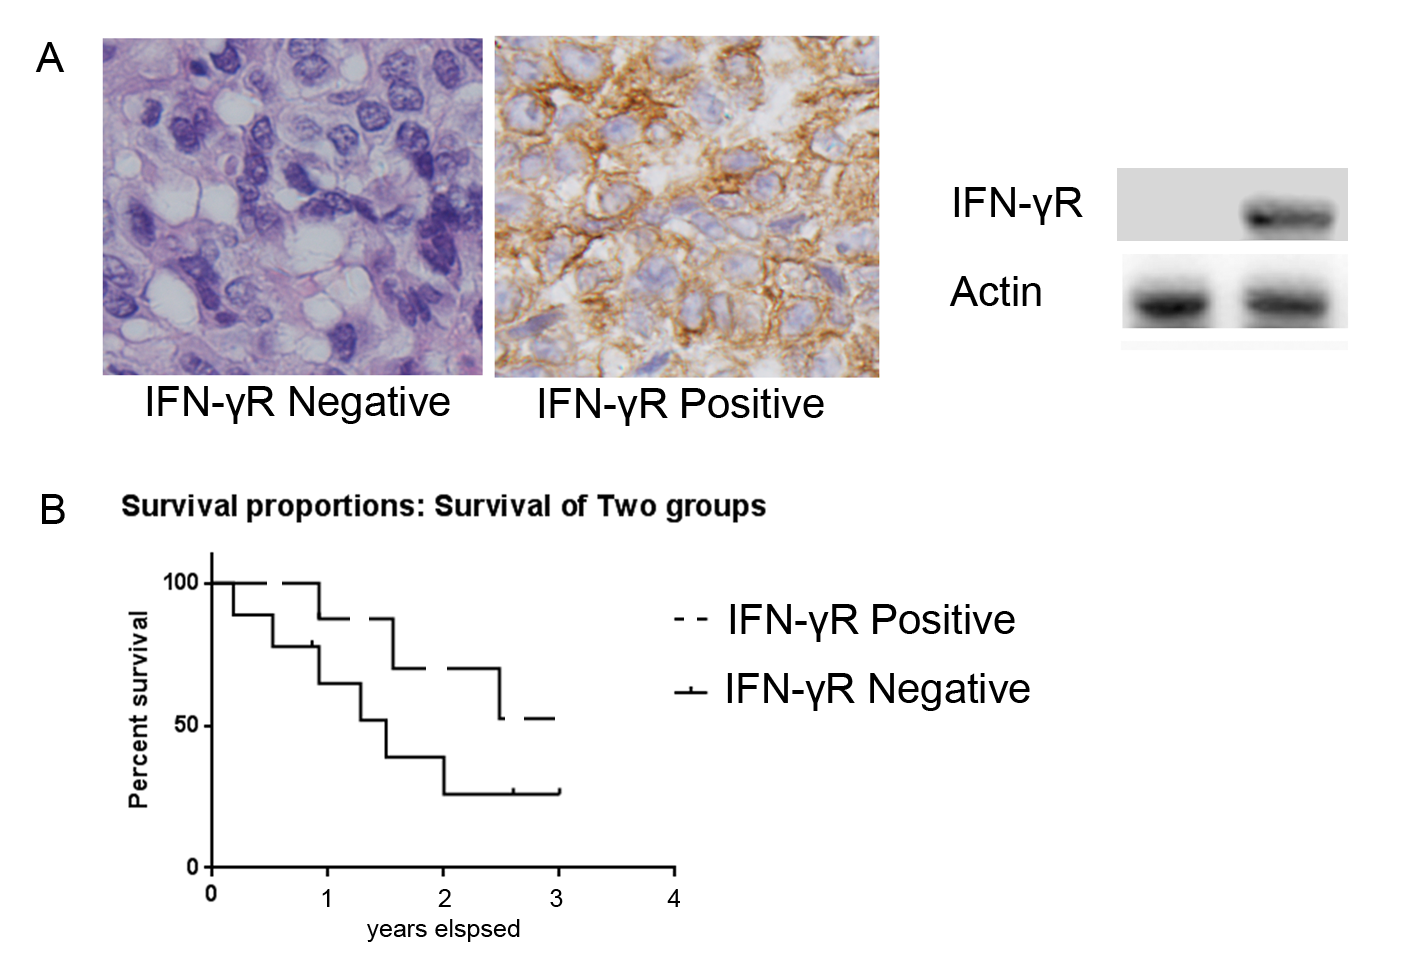 Figure 1. Representative IFN-γR immunostaining in NPC and effects of IFN-γR expression on patient’s survival. A: IFN-γR expression is positive in some patients and negative positive in others. B: In the patients that received concurrent chemotherapy with radiation therapy (55 out of 70), the survival rate of patients with low IFN-γR expression was significantly higher than that of patients with high IFN-γR expression (p = 0.001).